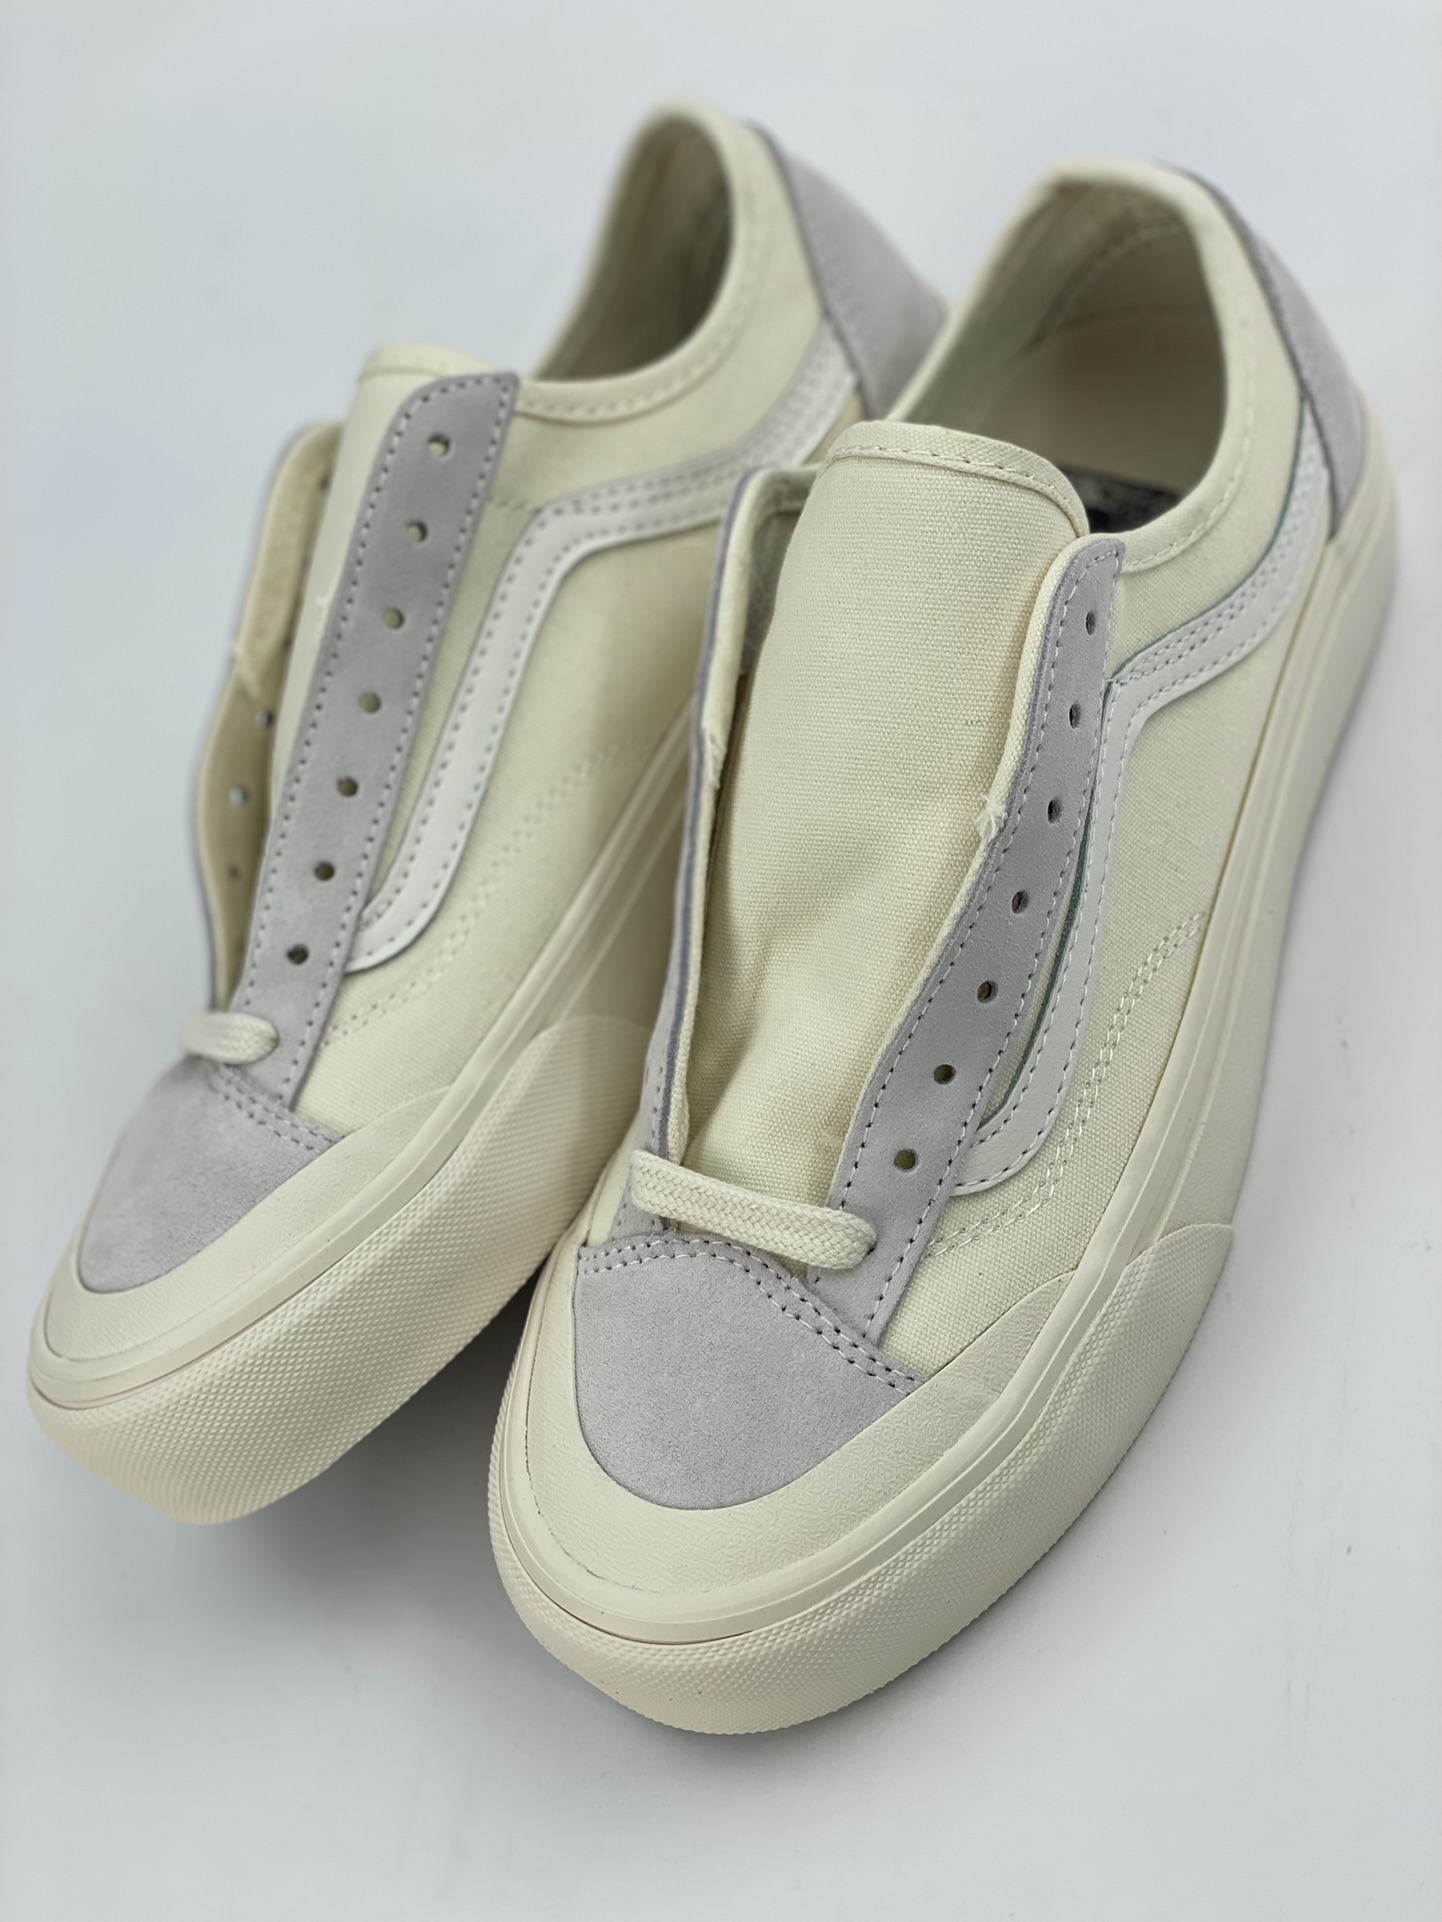 Vans official Style 136 Decon VR3 white simple retro sneakers